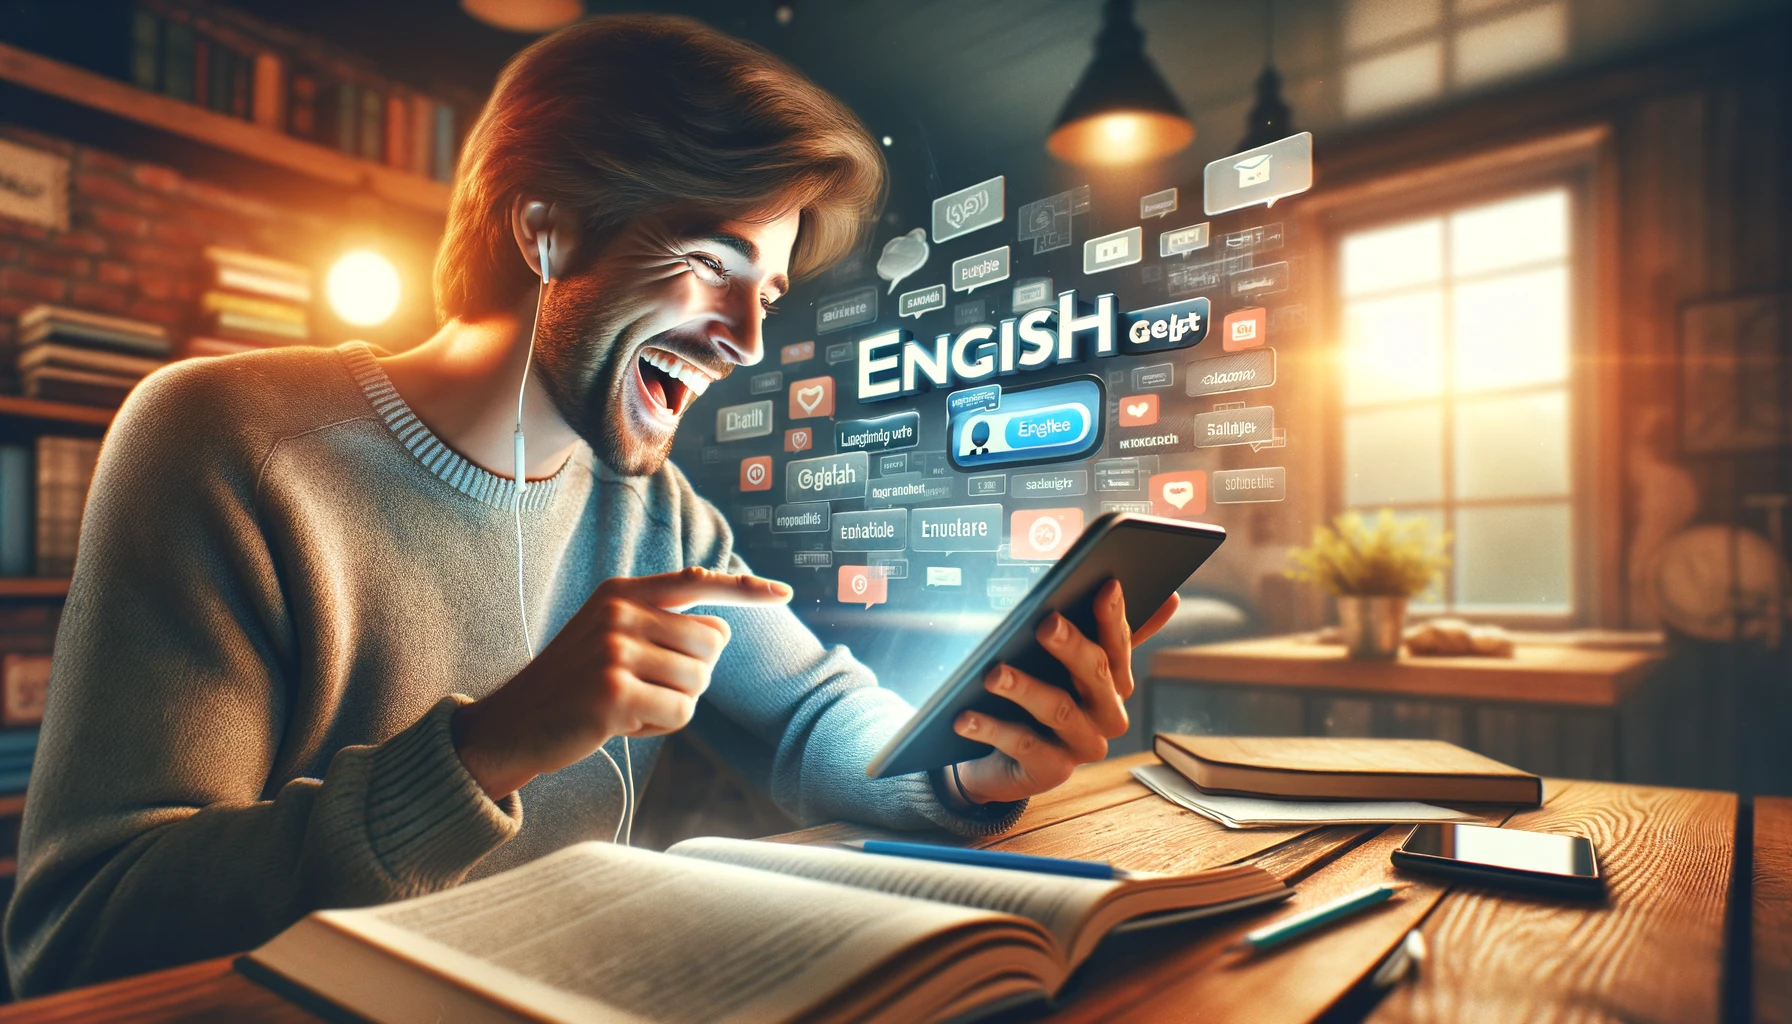 Learn English easily with ChatGPT